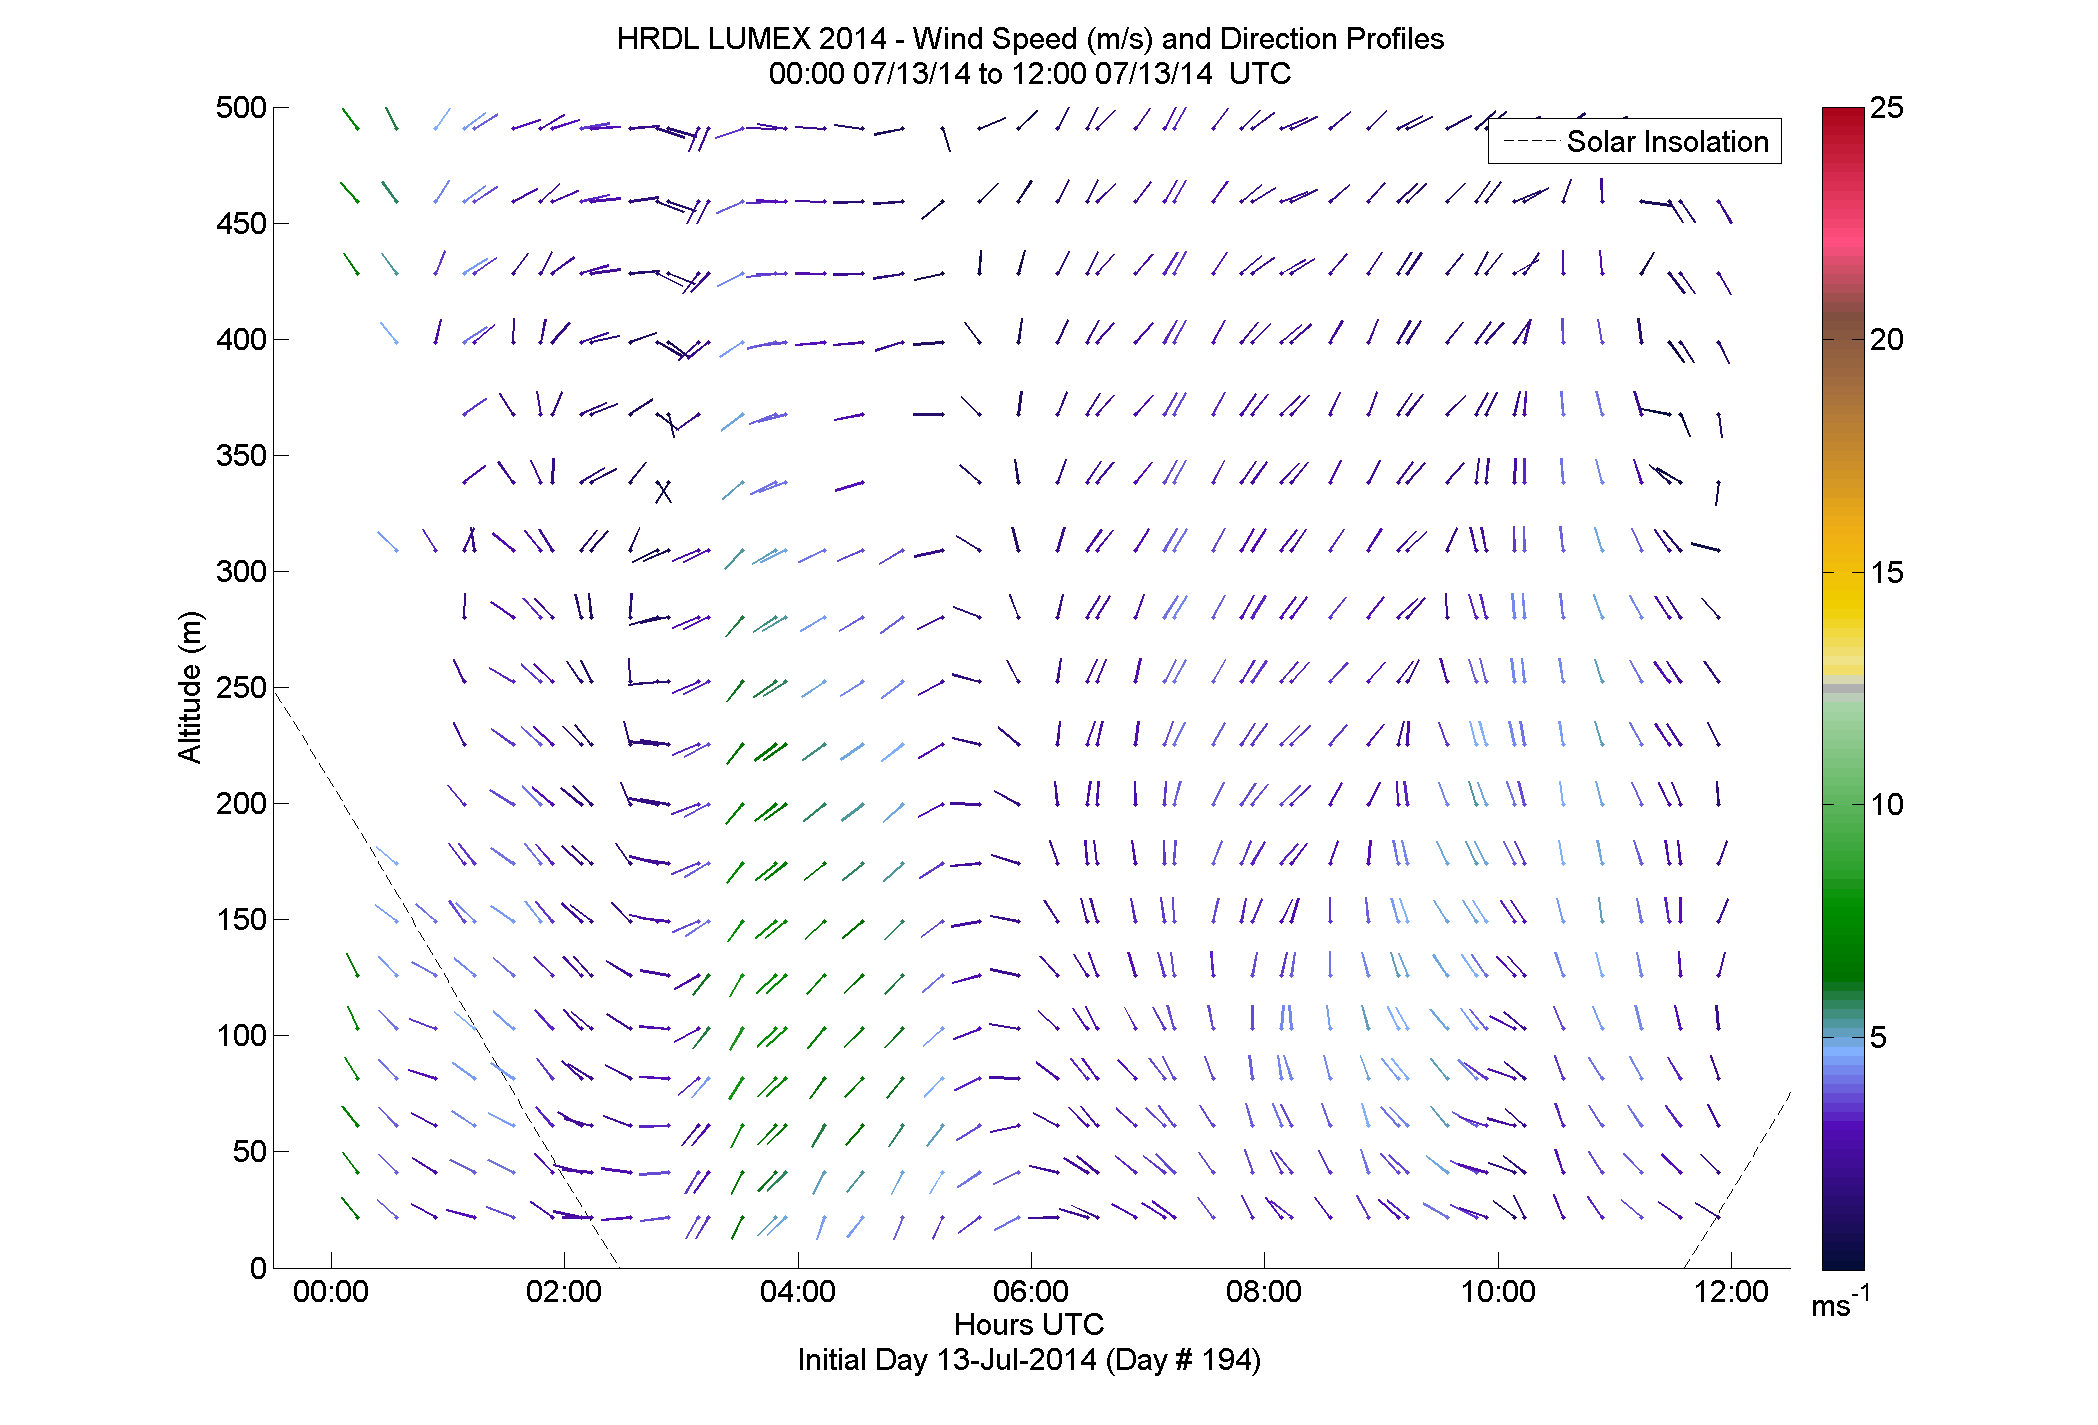 HRDL speed and direction profile - July 13 am